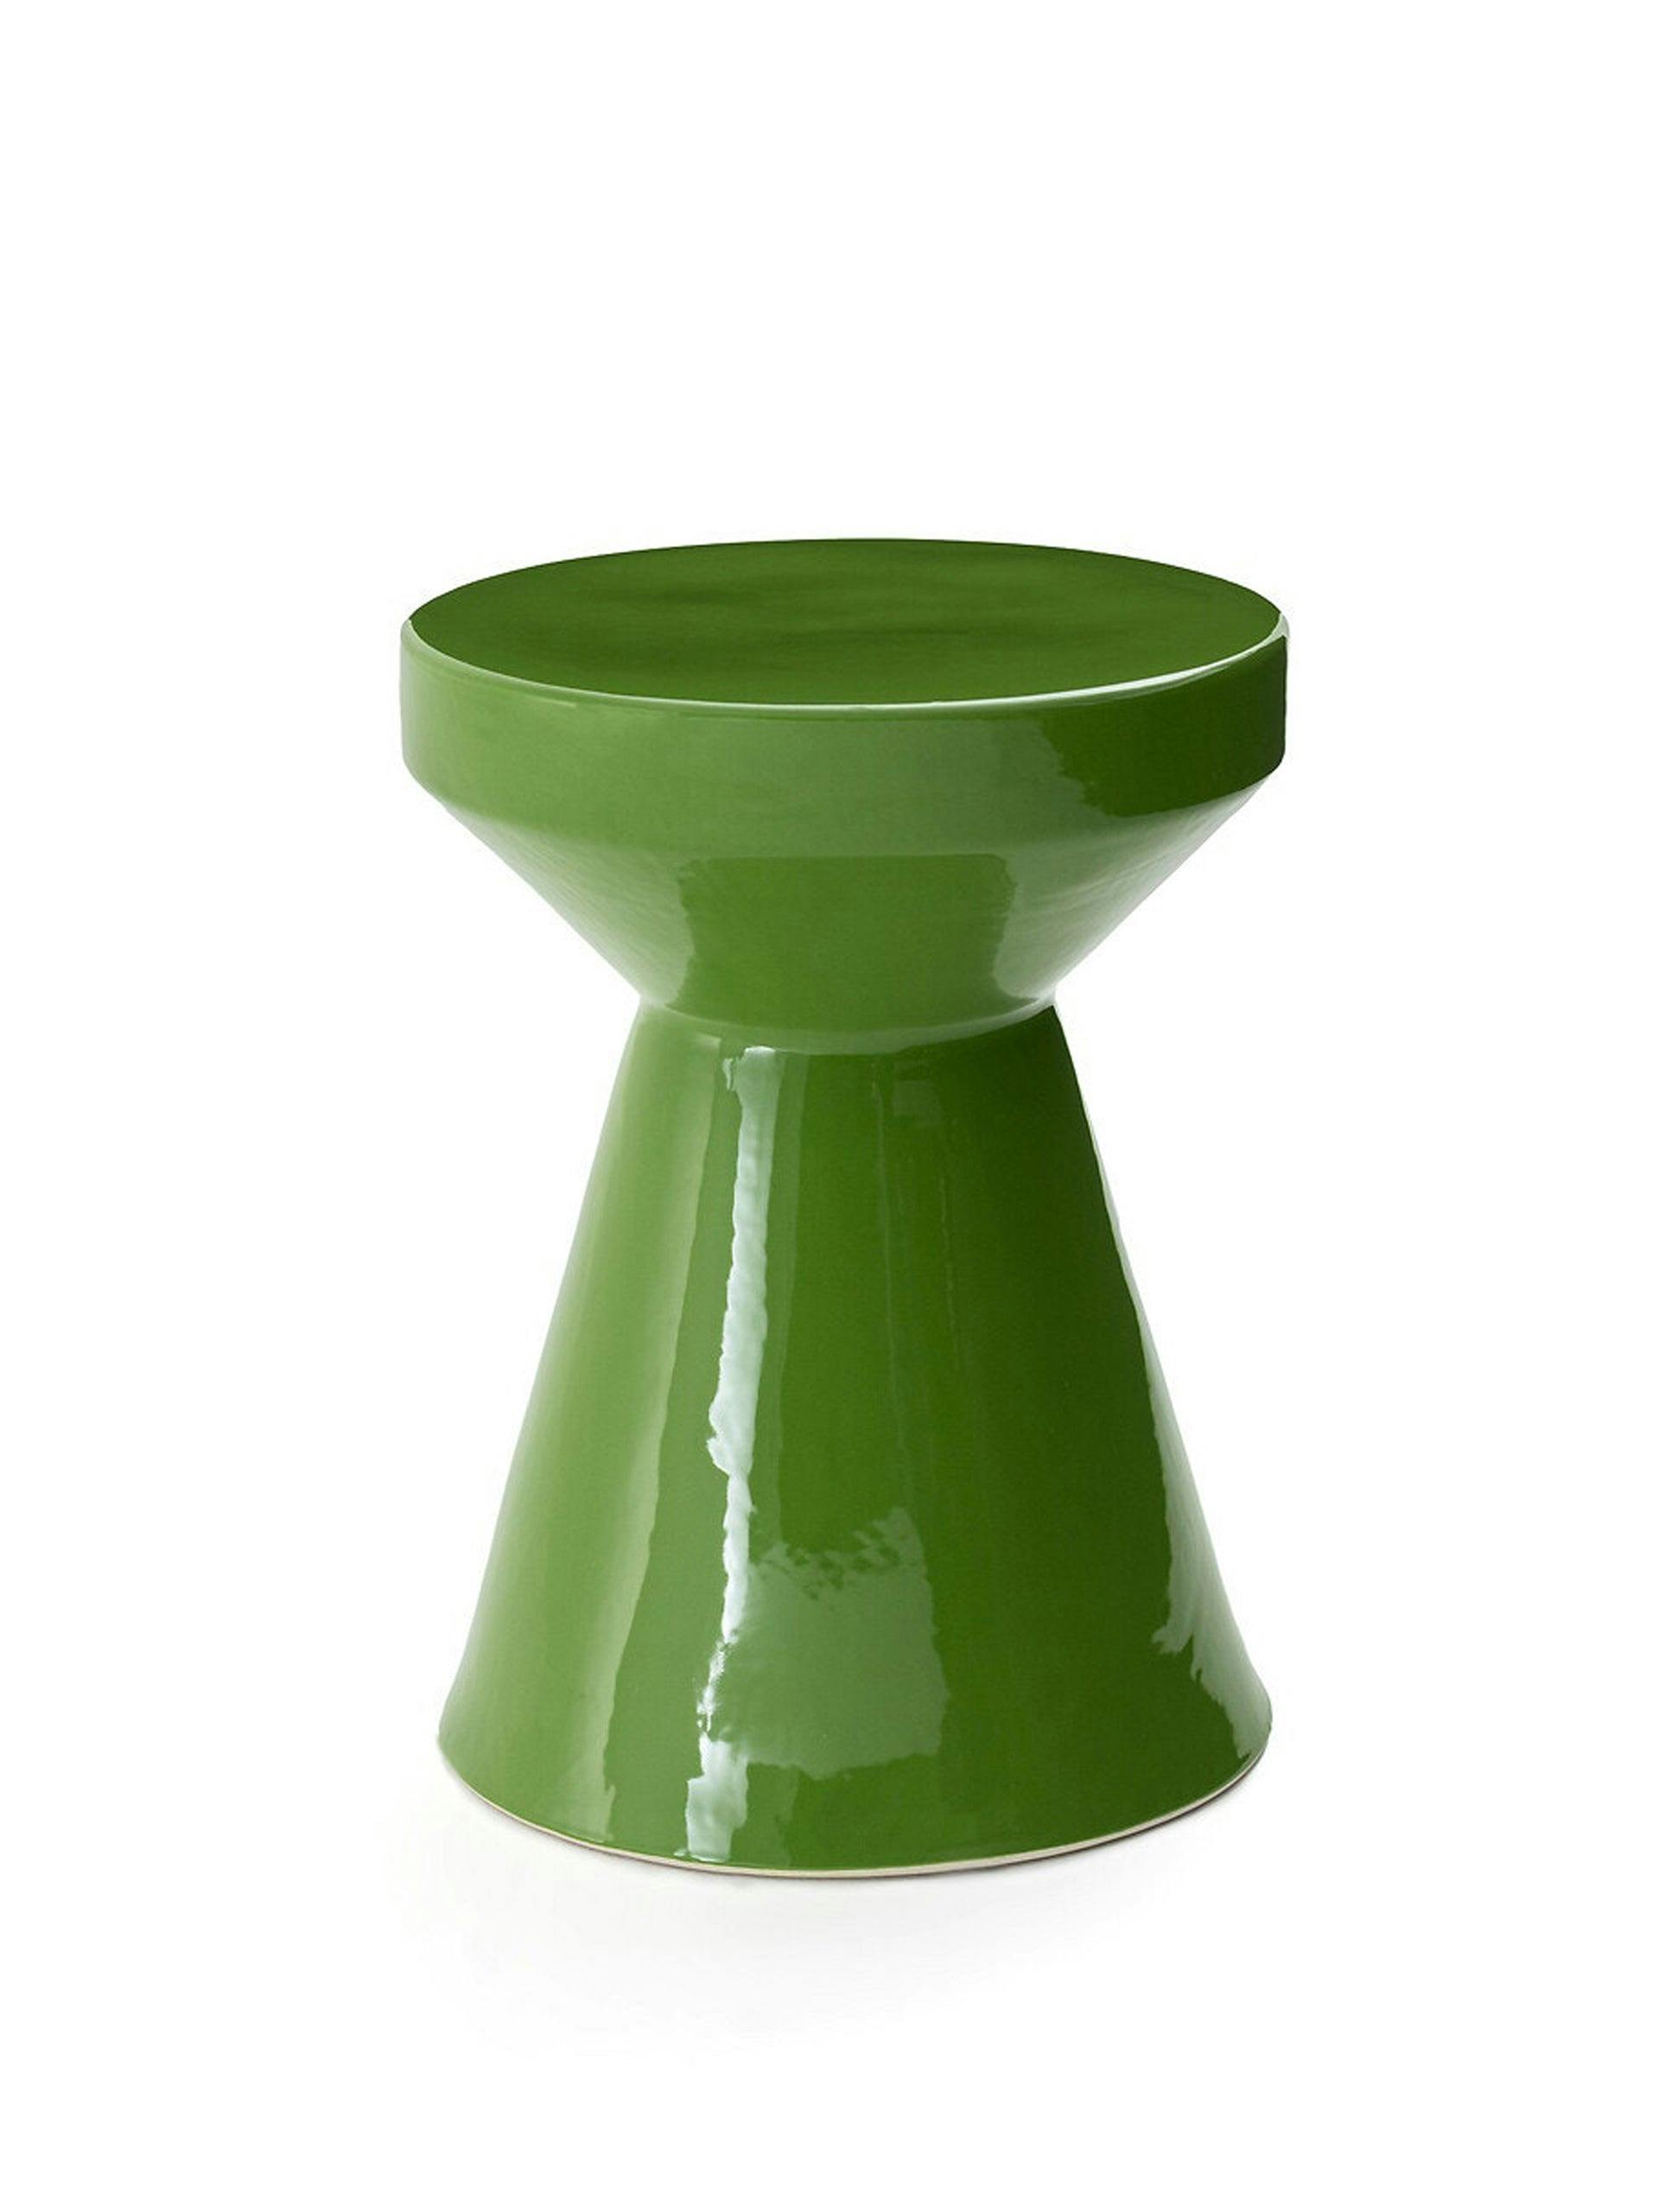 Green ceramic side table